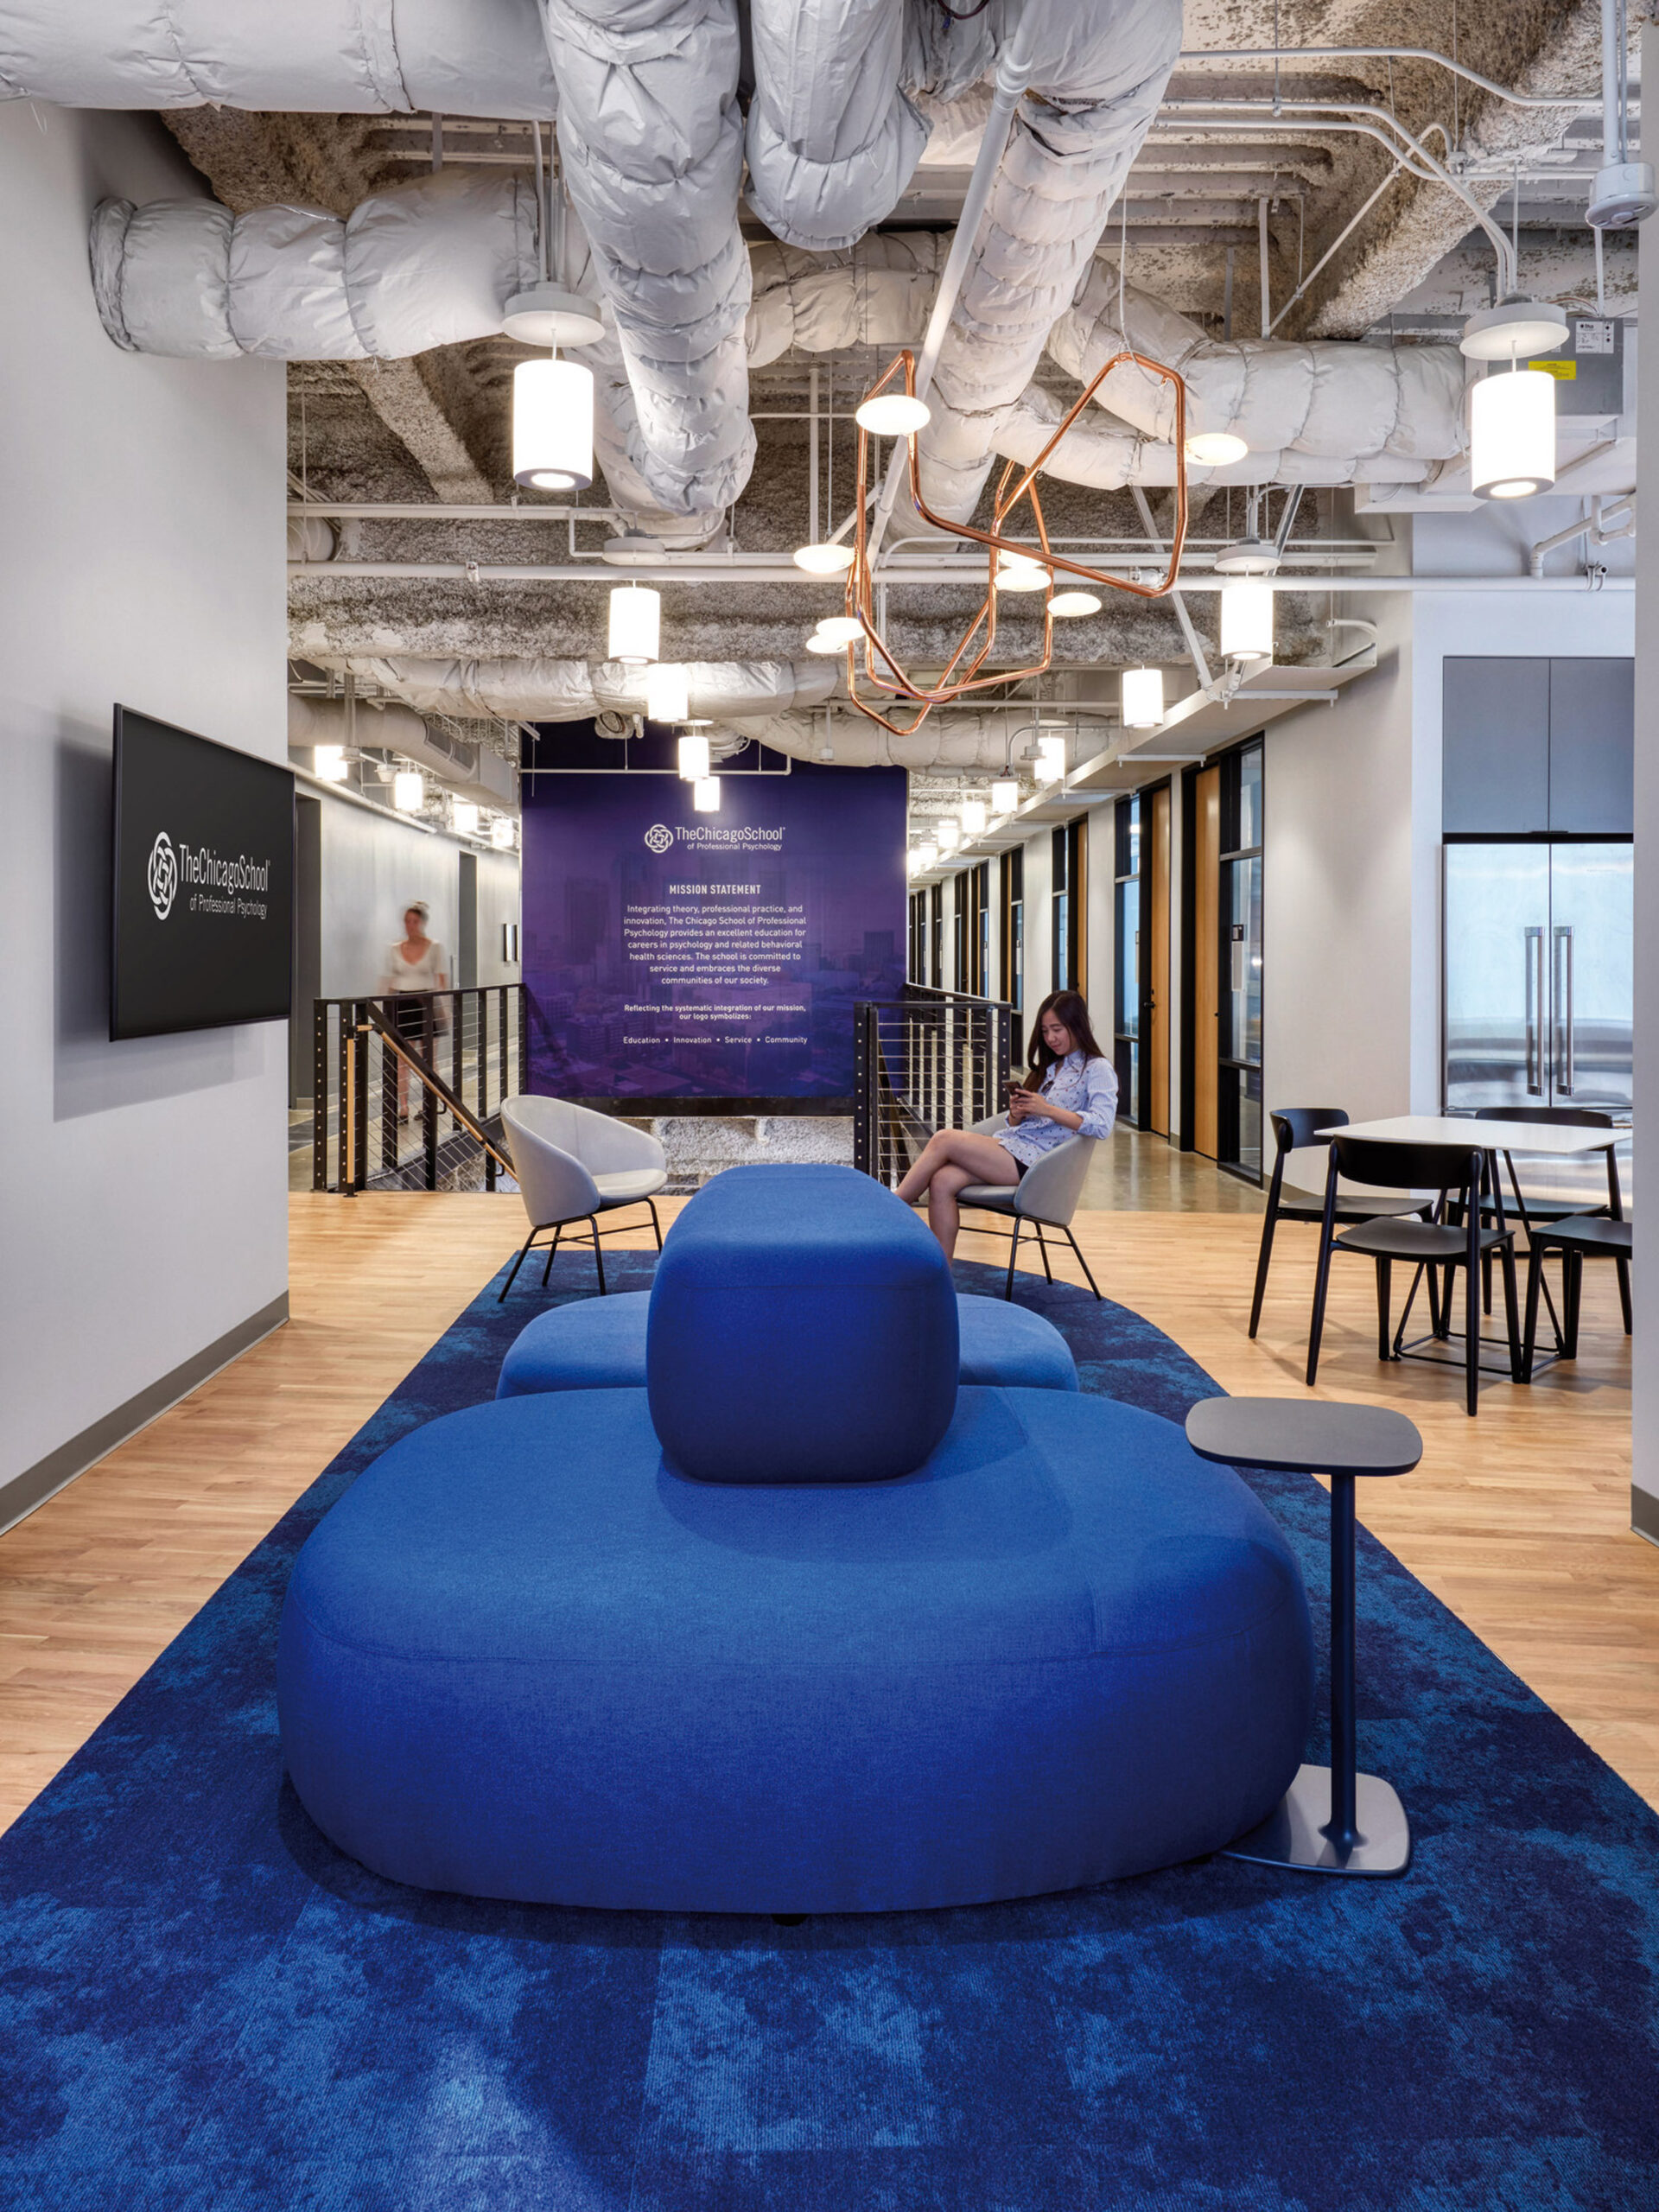 Open-plan office space featuring exposed ductwork and pendant lighting, with a vibrant blue area rug anchoring modular seating. Neutral walls showcase company branding, creating a contemporary, collaborative atmosphere.